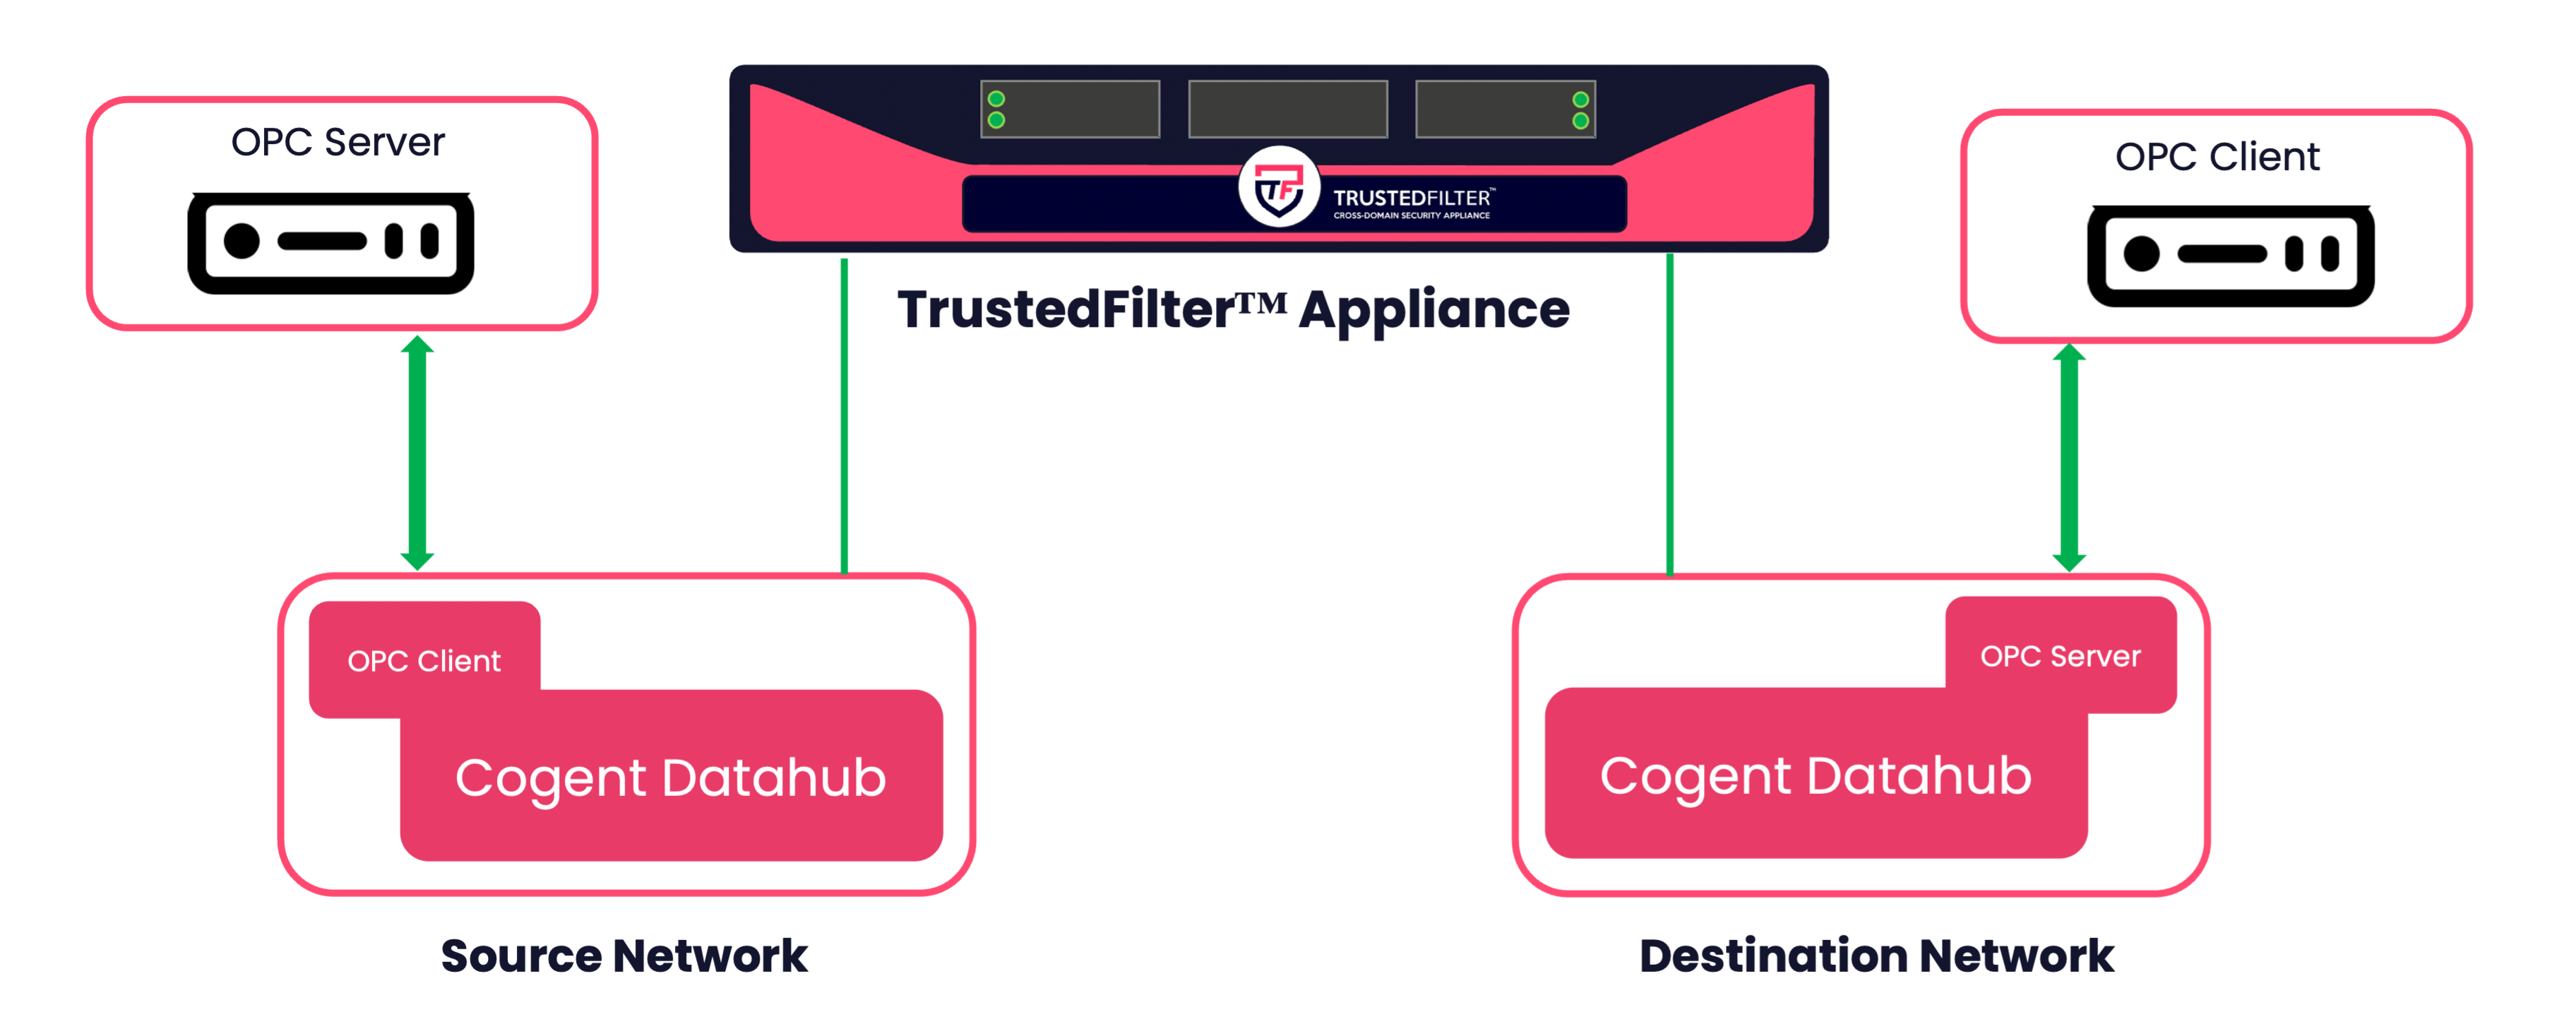 OPC Transfer Supported by Cogent DataHub - Cross-Domain Solution - 4Secure